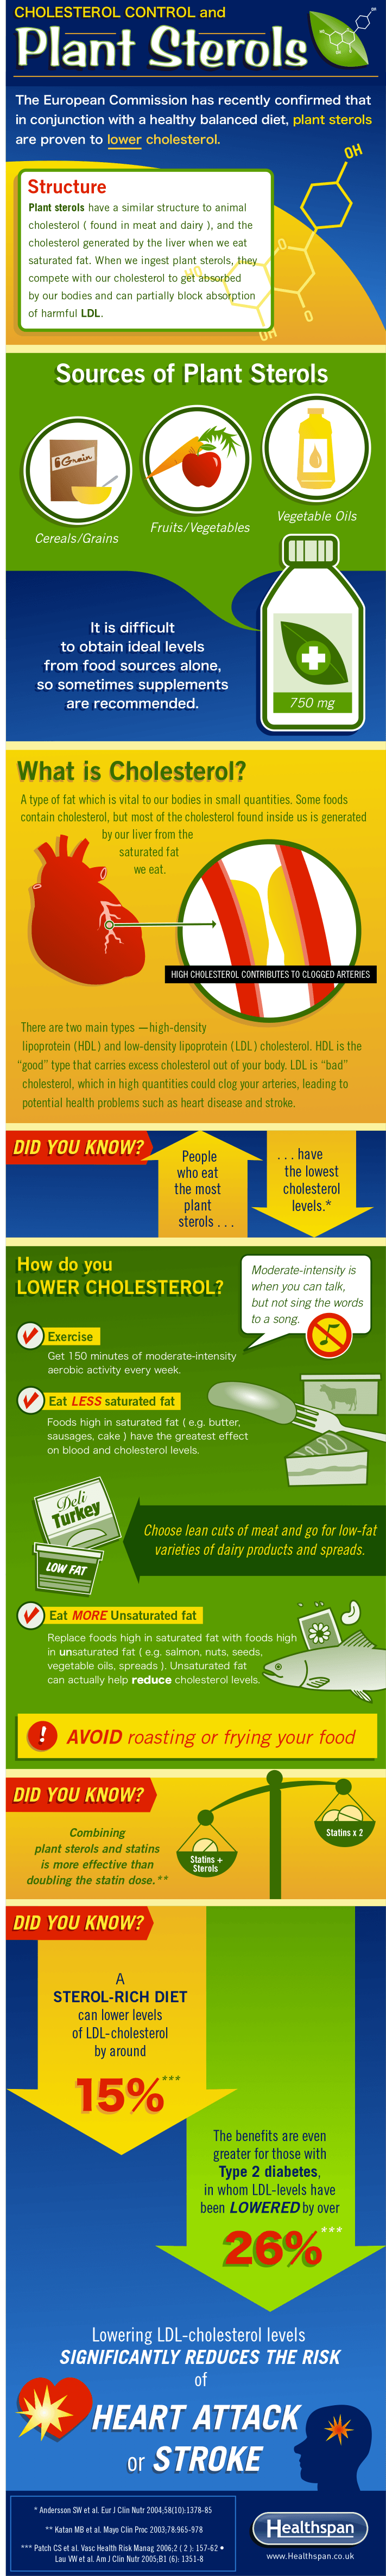 Cholesterol Control and Plant Sterols Infographic